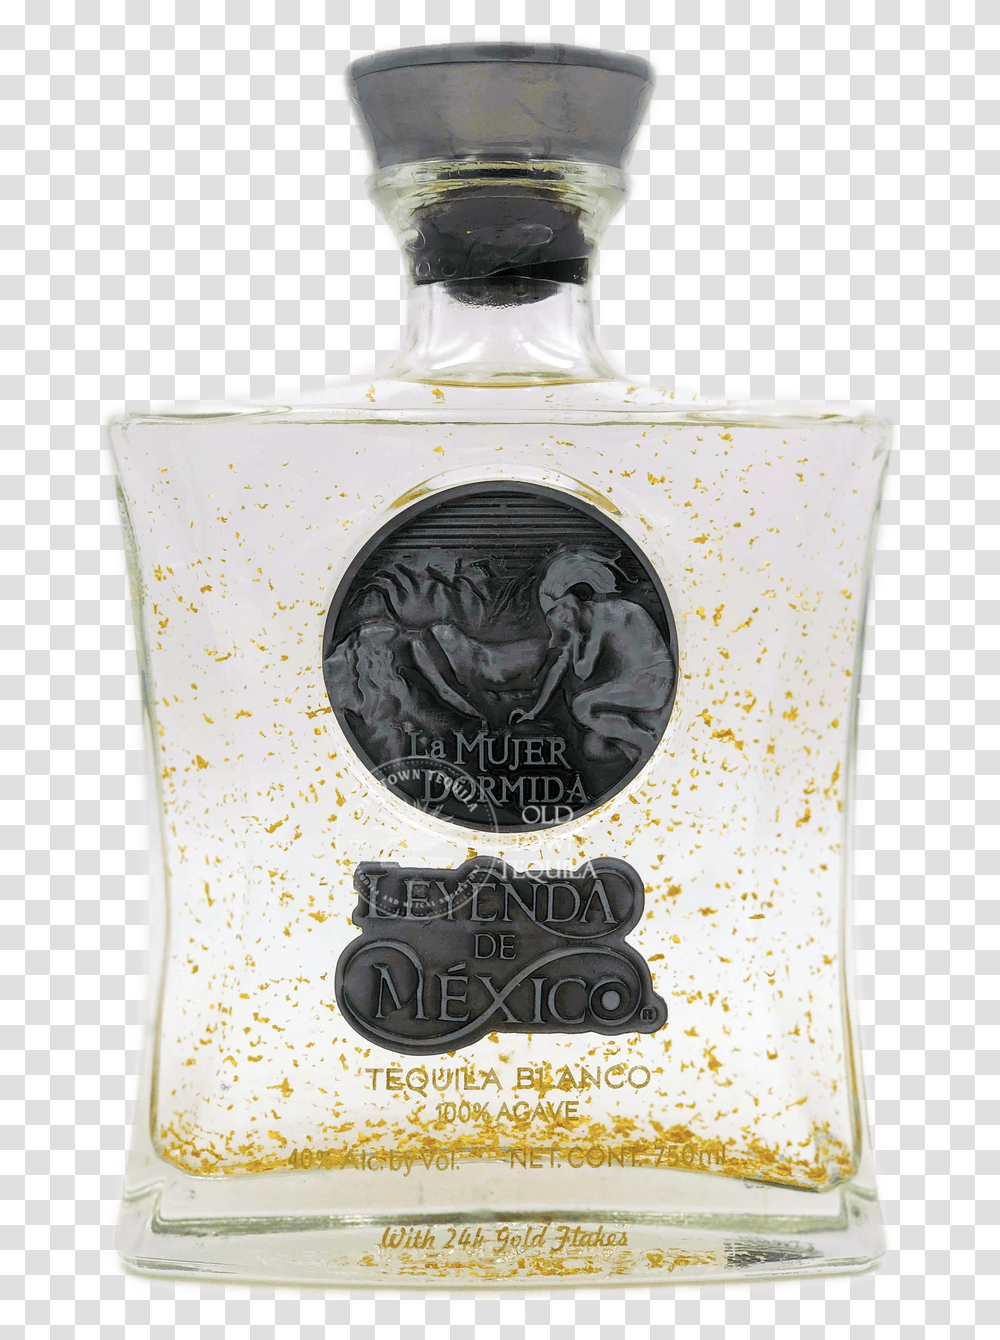 Leyenda De Mexico Blanco Tequila With 24 Gold Flake Perfume, Liquor, Alcohol, Beverage, Drink Transparent Png